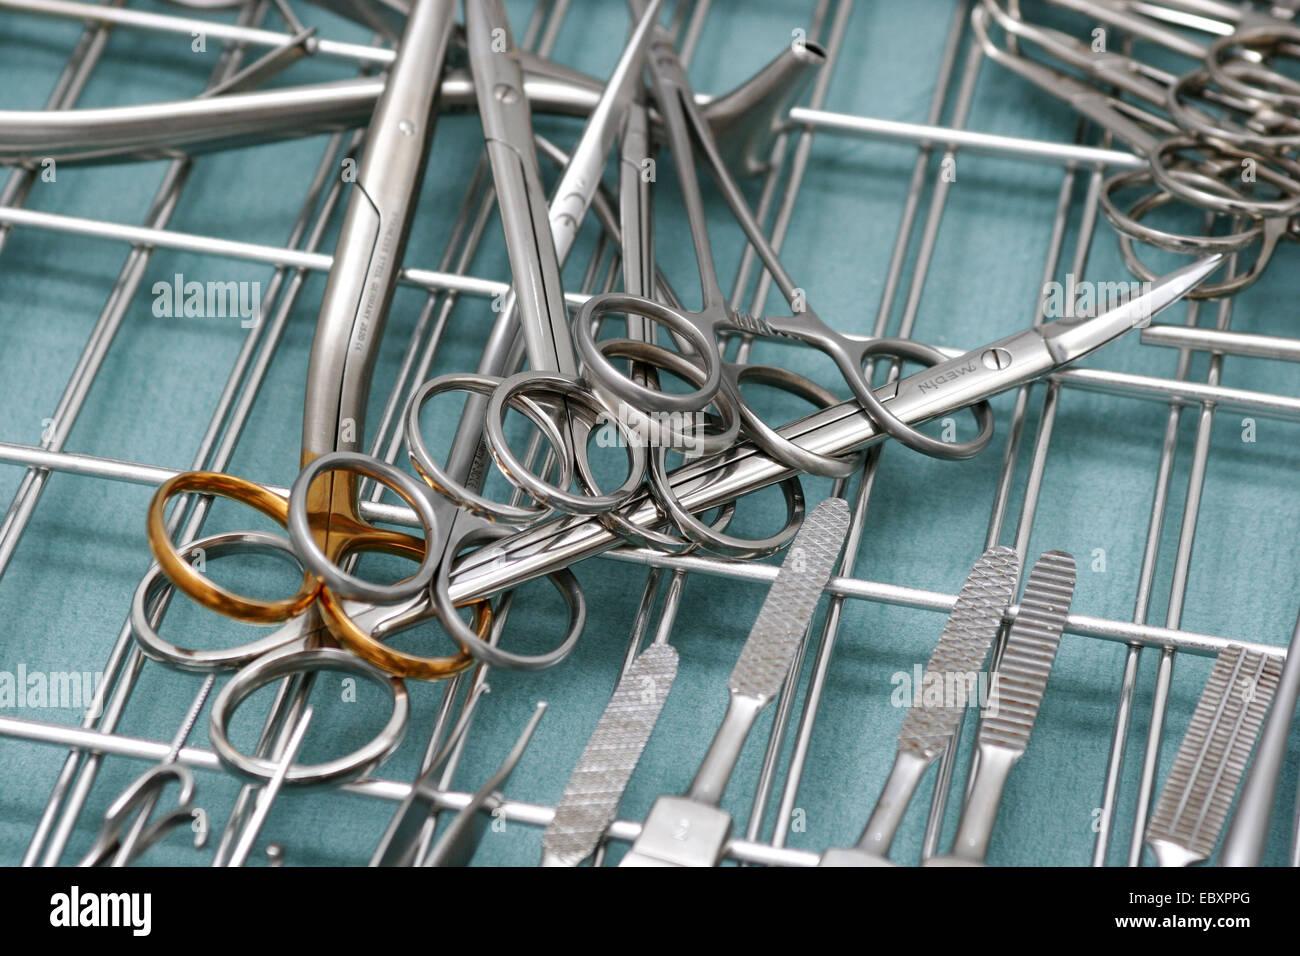 surgical instruments Stock Photo